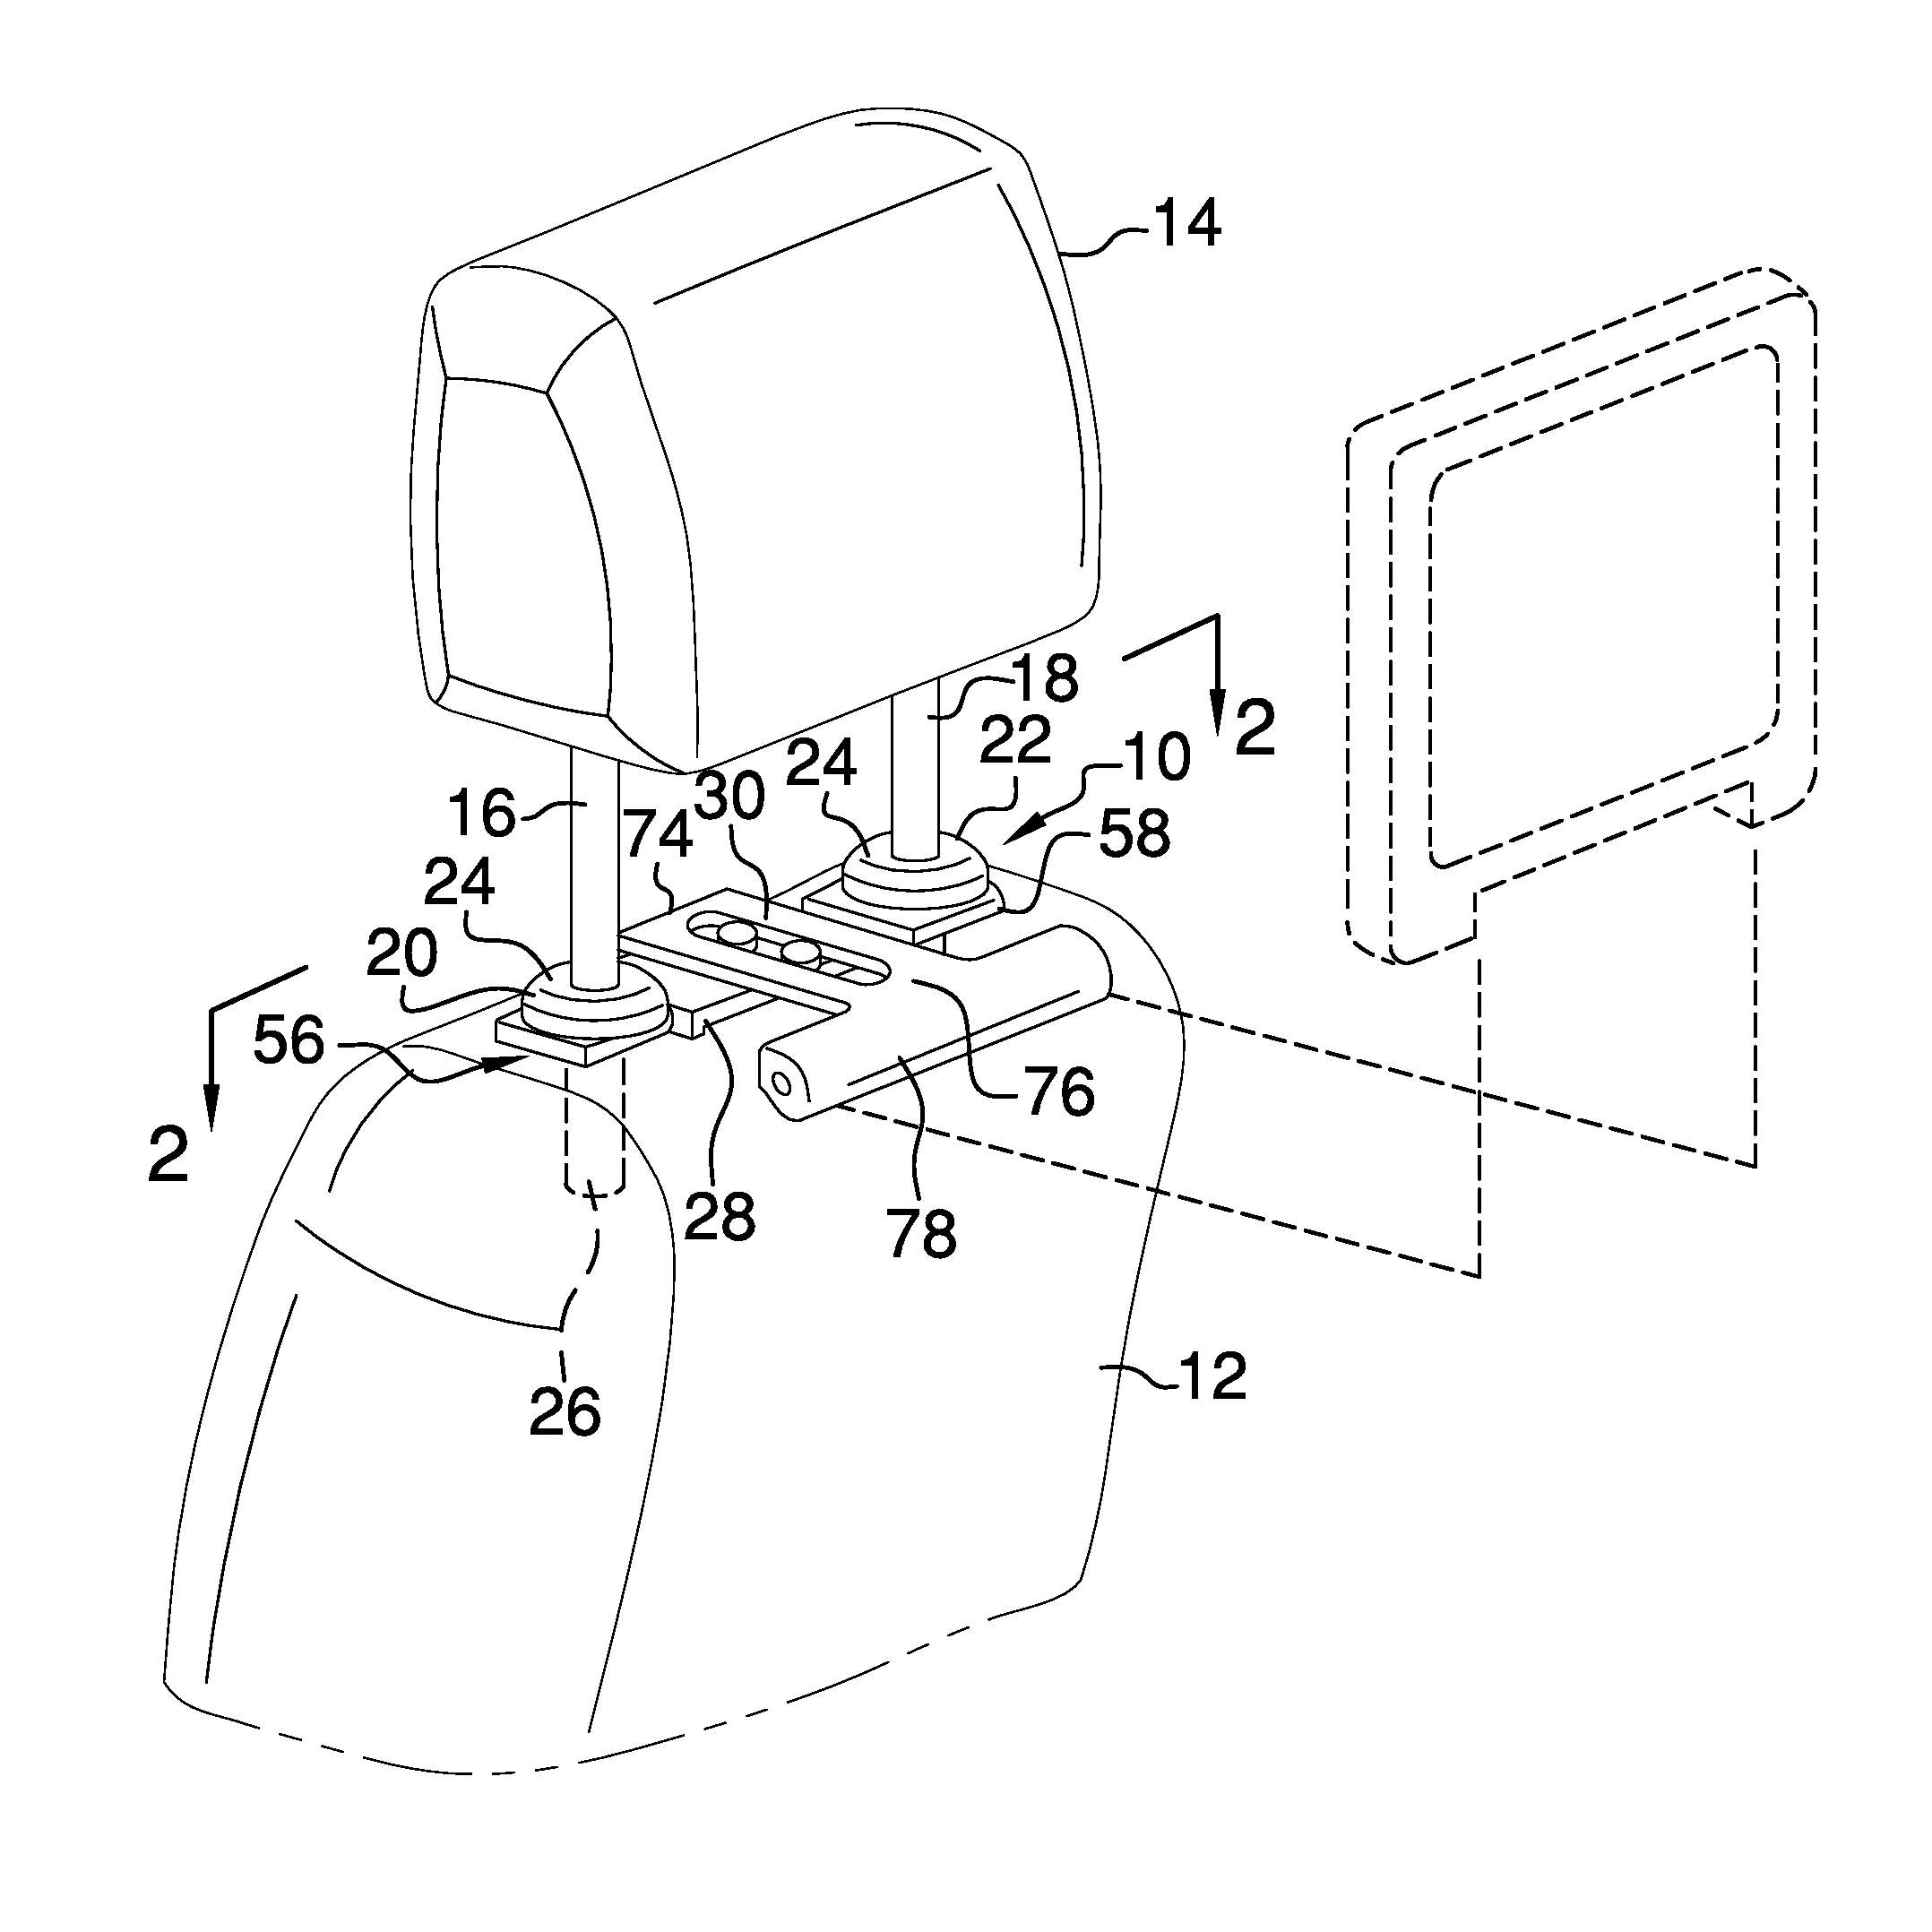 Mounting assembly for securing an entertainment device to a vehicle seat